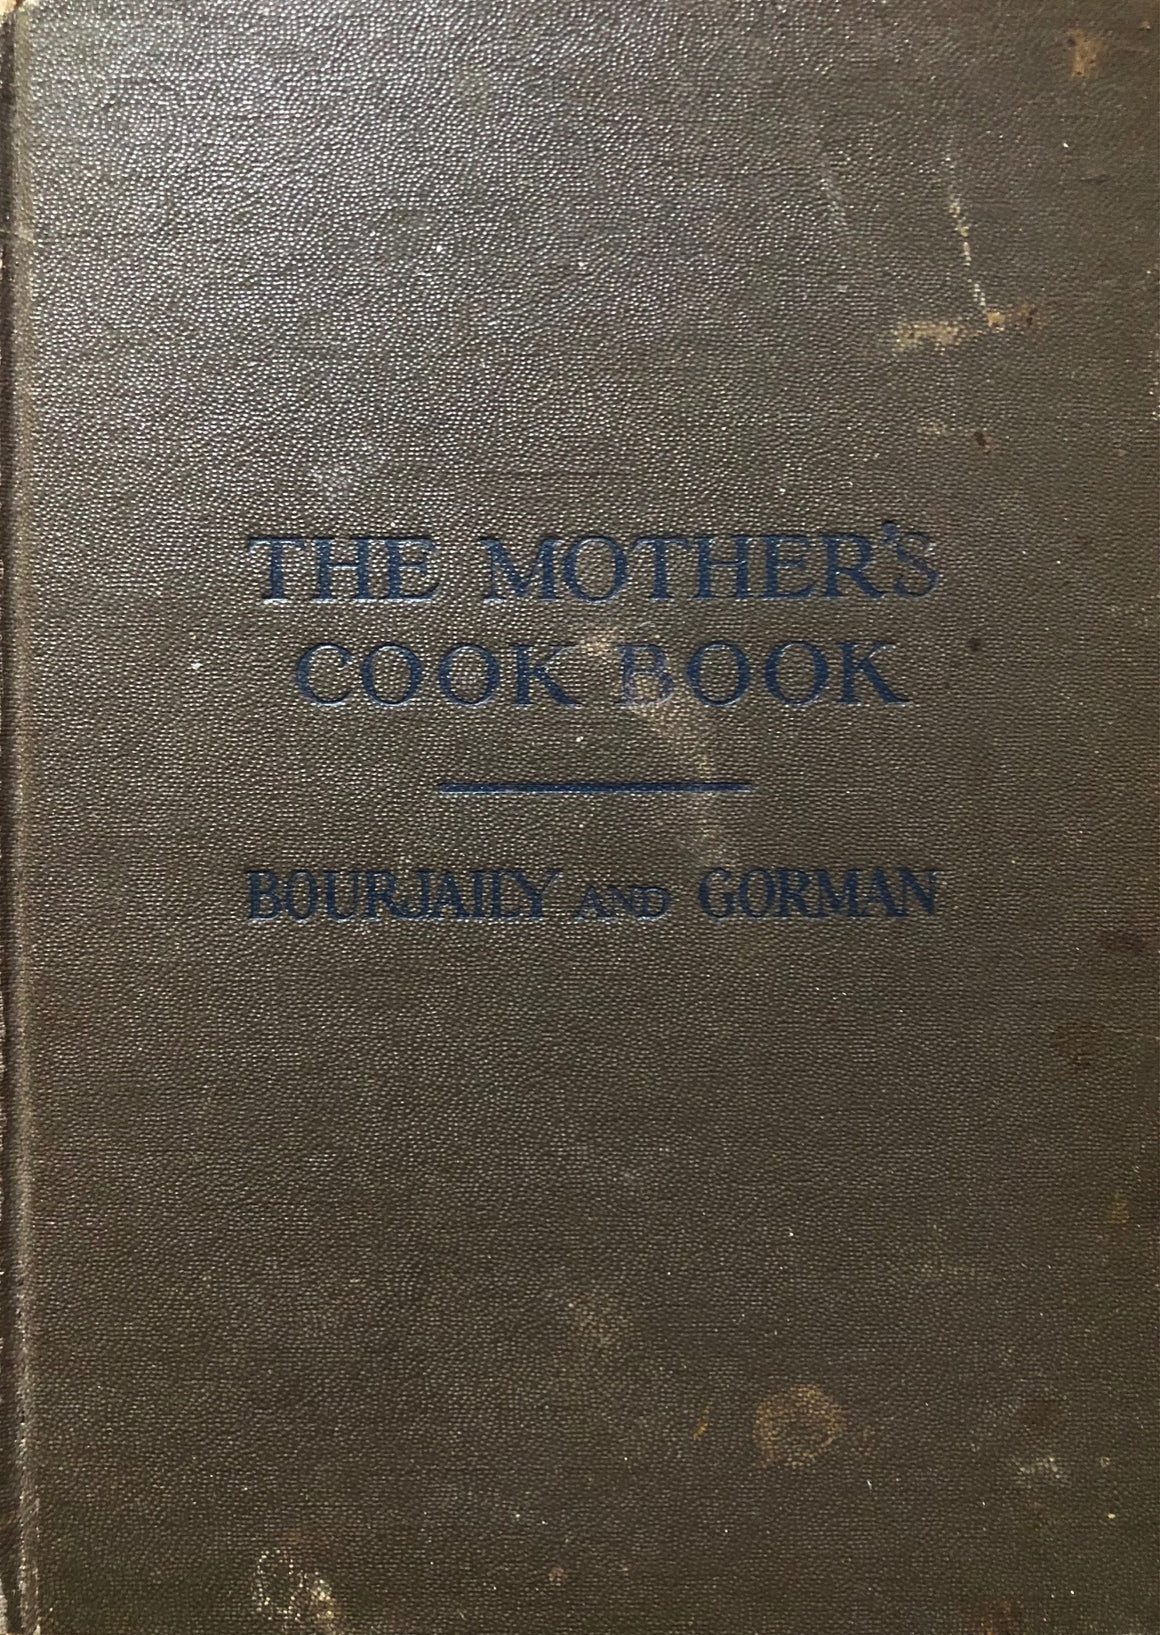 (*NEW ARRIVAL*) (Children's) Barbara Webb Bourjaily & Dorothy May Gorman. The Mother's Cook Book: How to Prepare Food for Children. Intro. on child feeding and health by Justin Garvin, M.D.